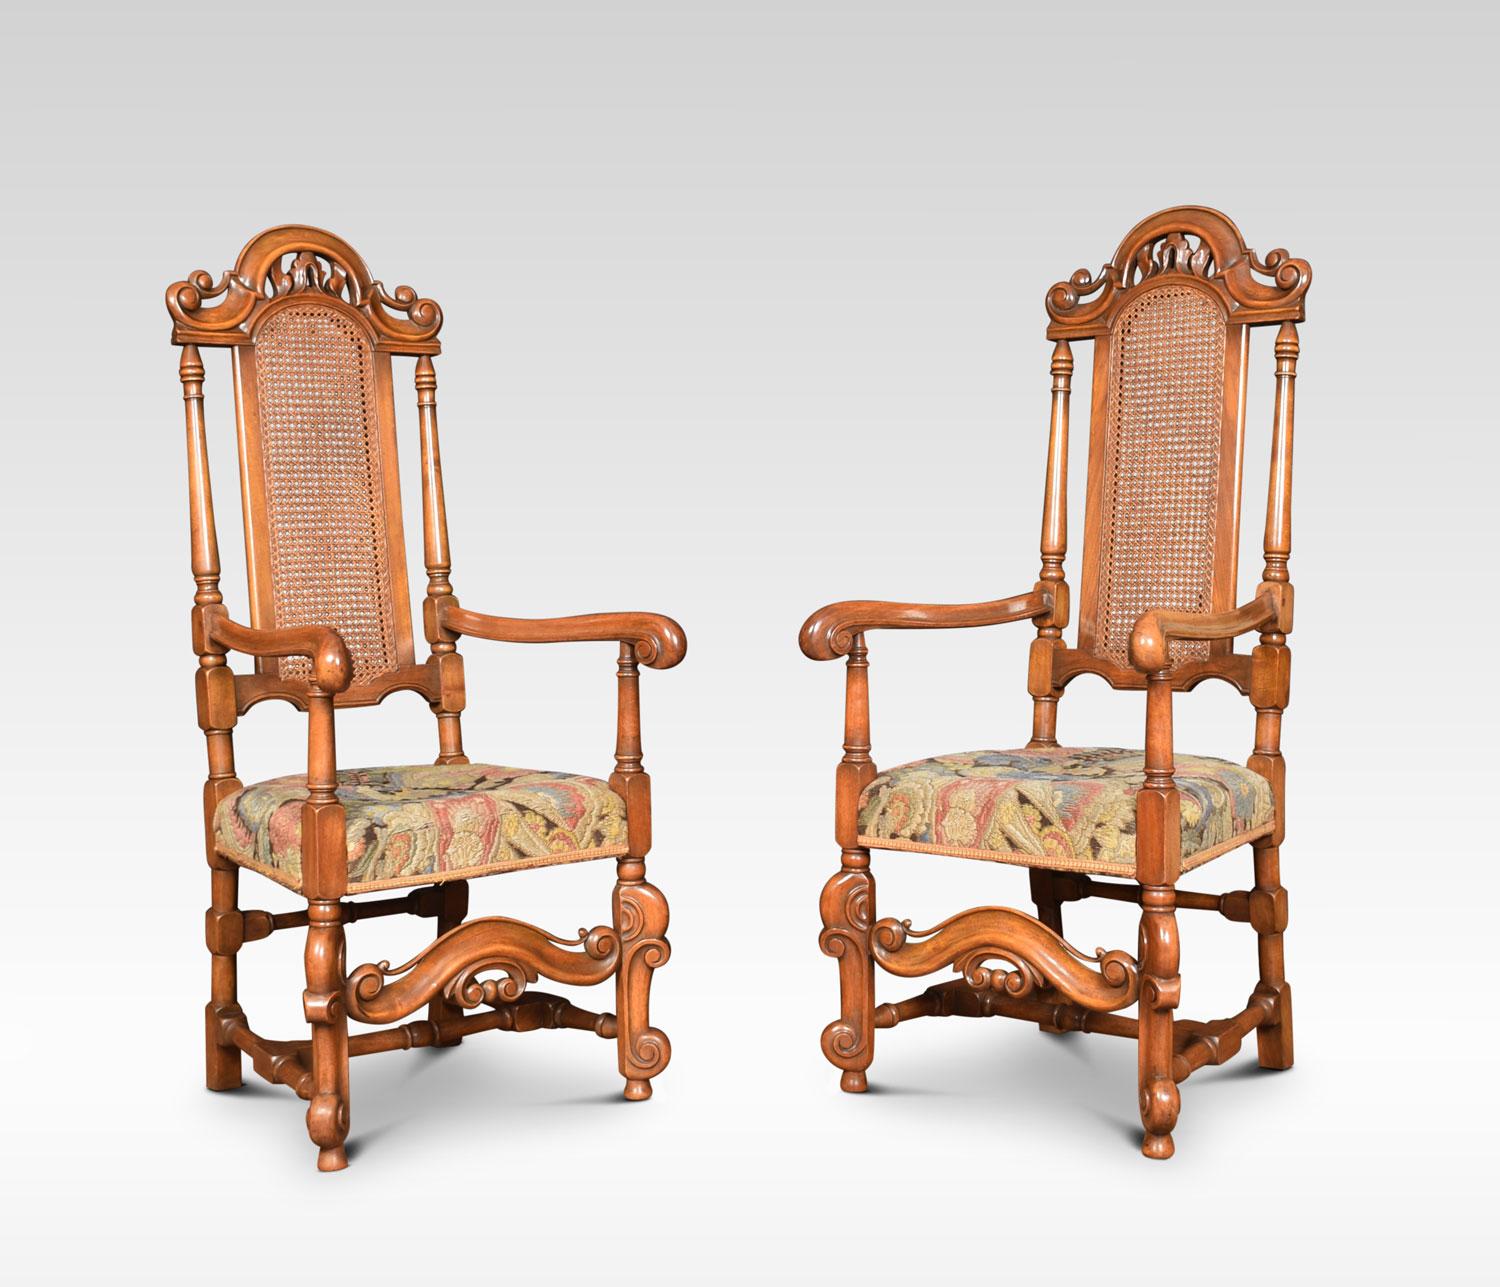 Set of eight Carolean style high back dining chairs. Comprising of two armchairs and six chairs, with scrolling crests above arched caned backs and overstuffed needlepoint seats. Raised up on turned scrolling supports united by